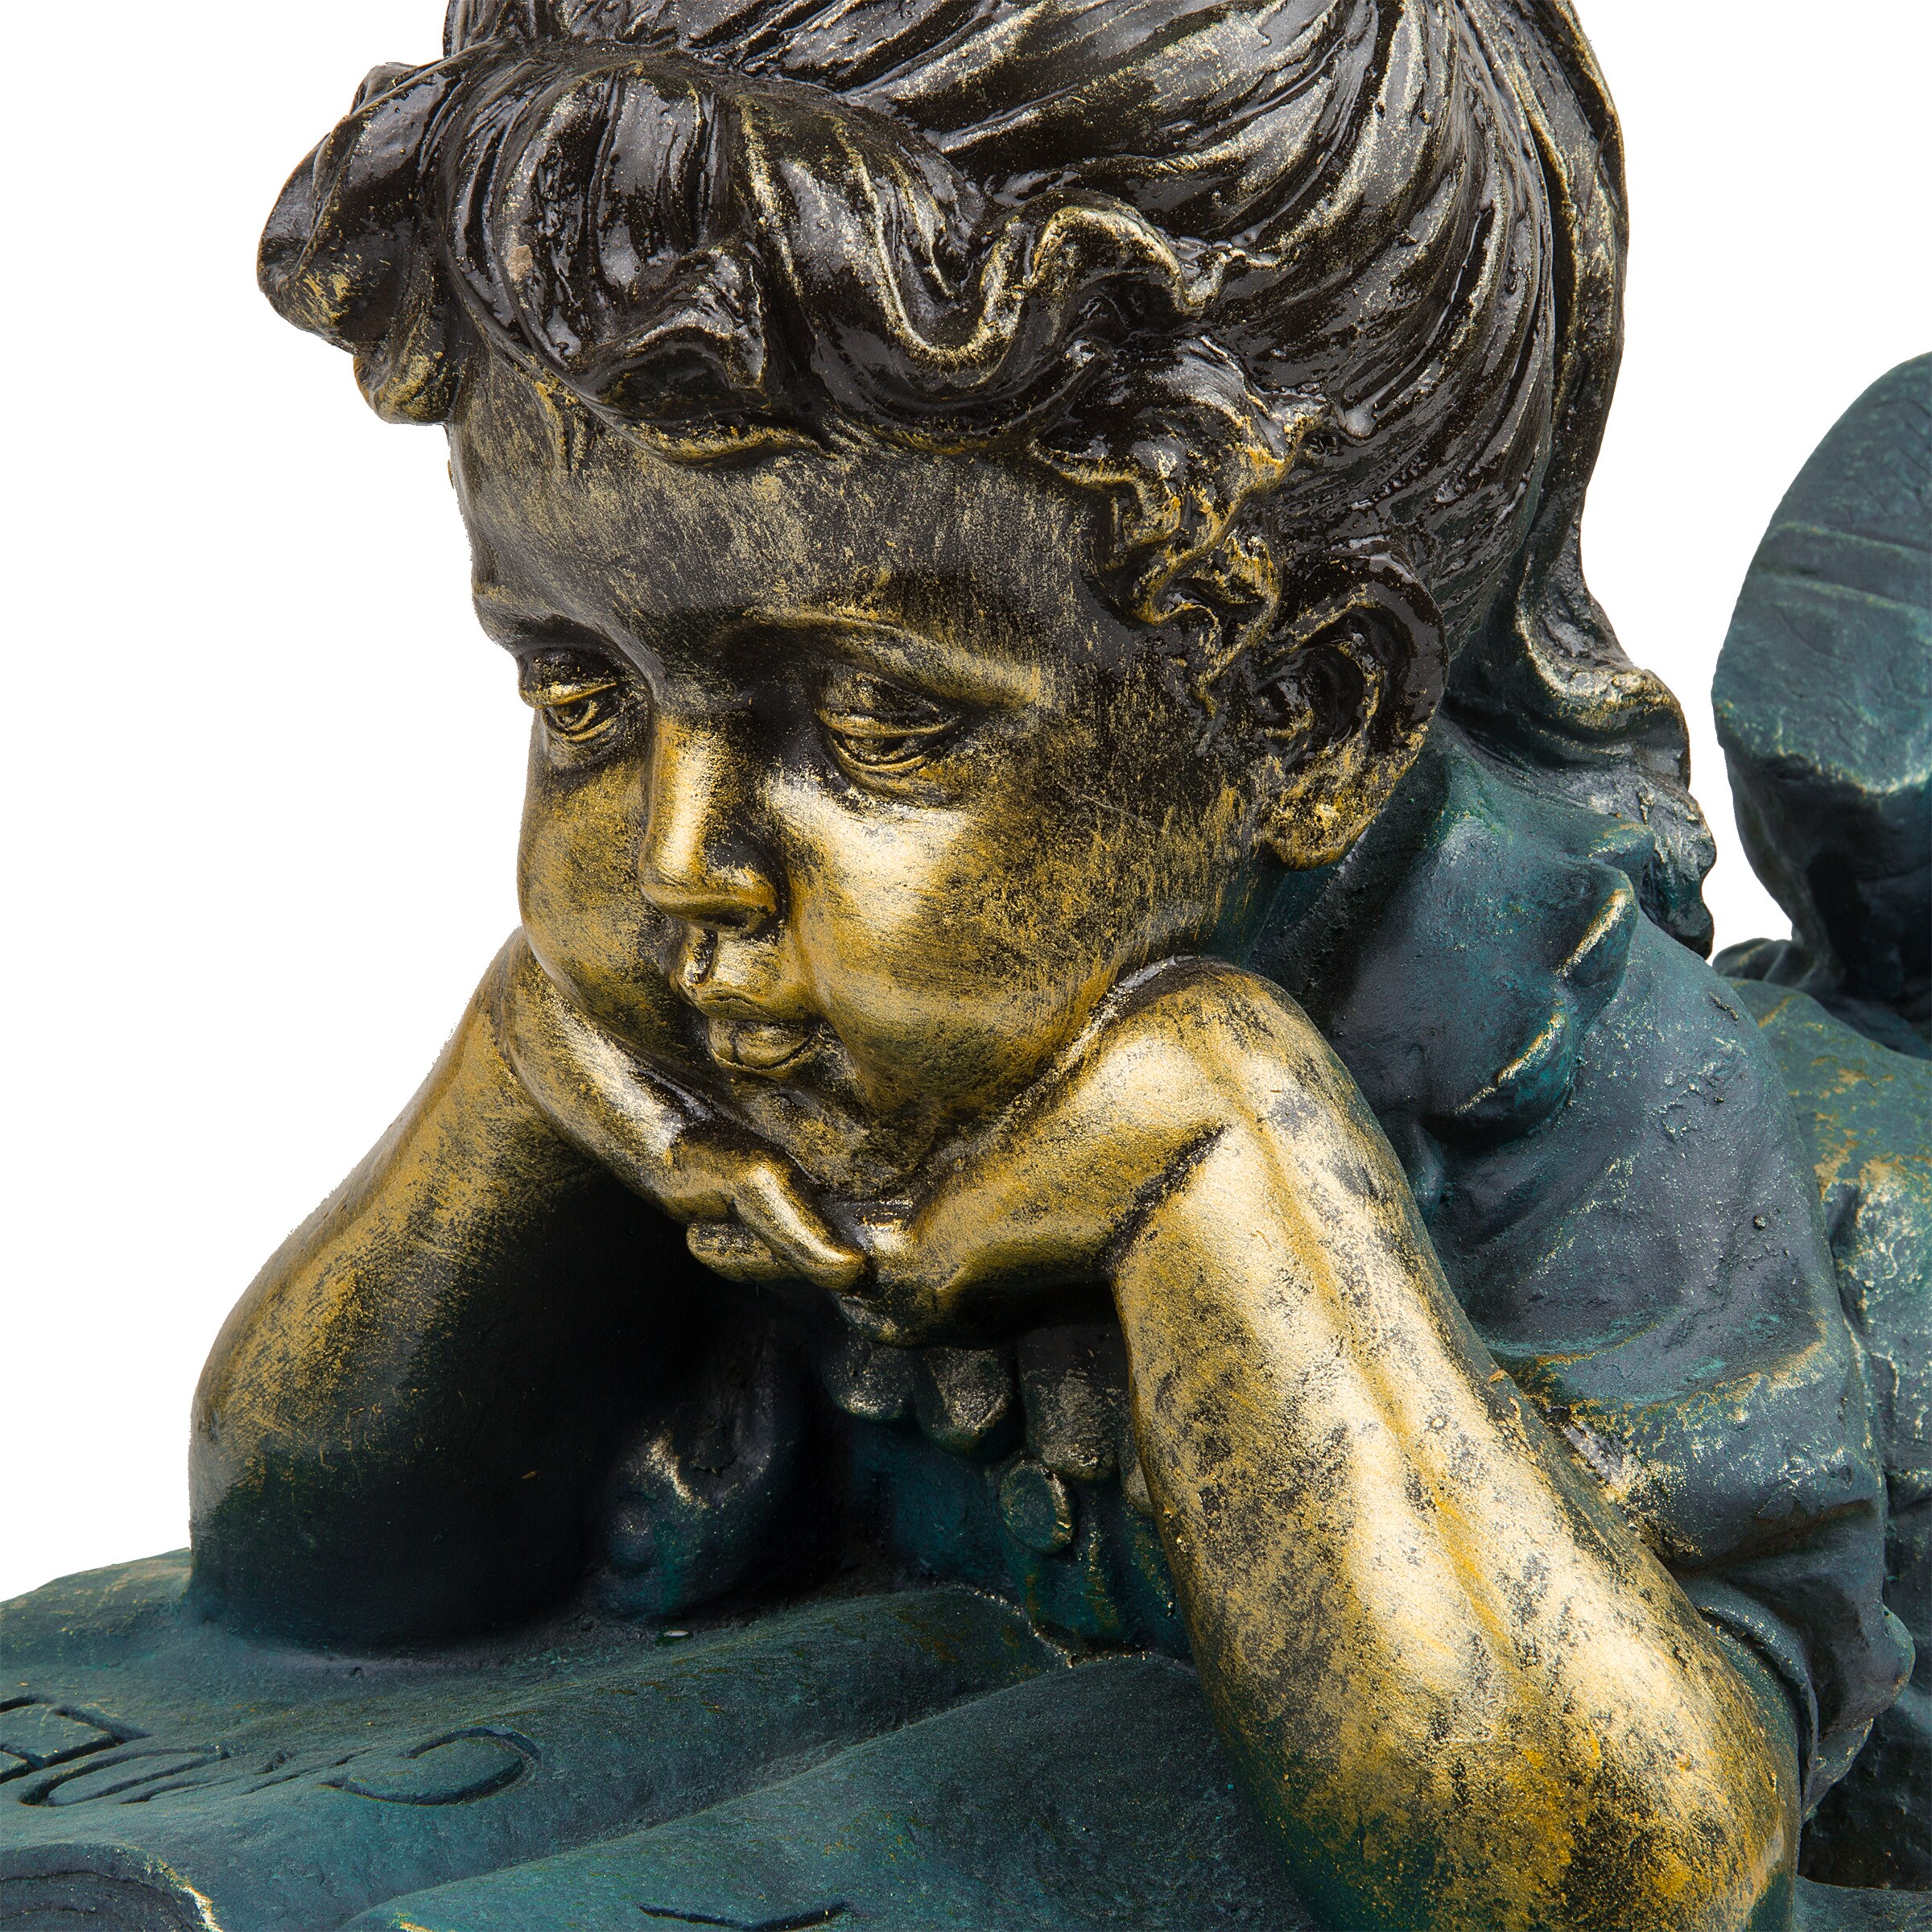 Alpine Boy and Girl Reading Together Statue